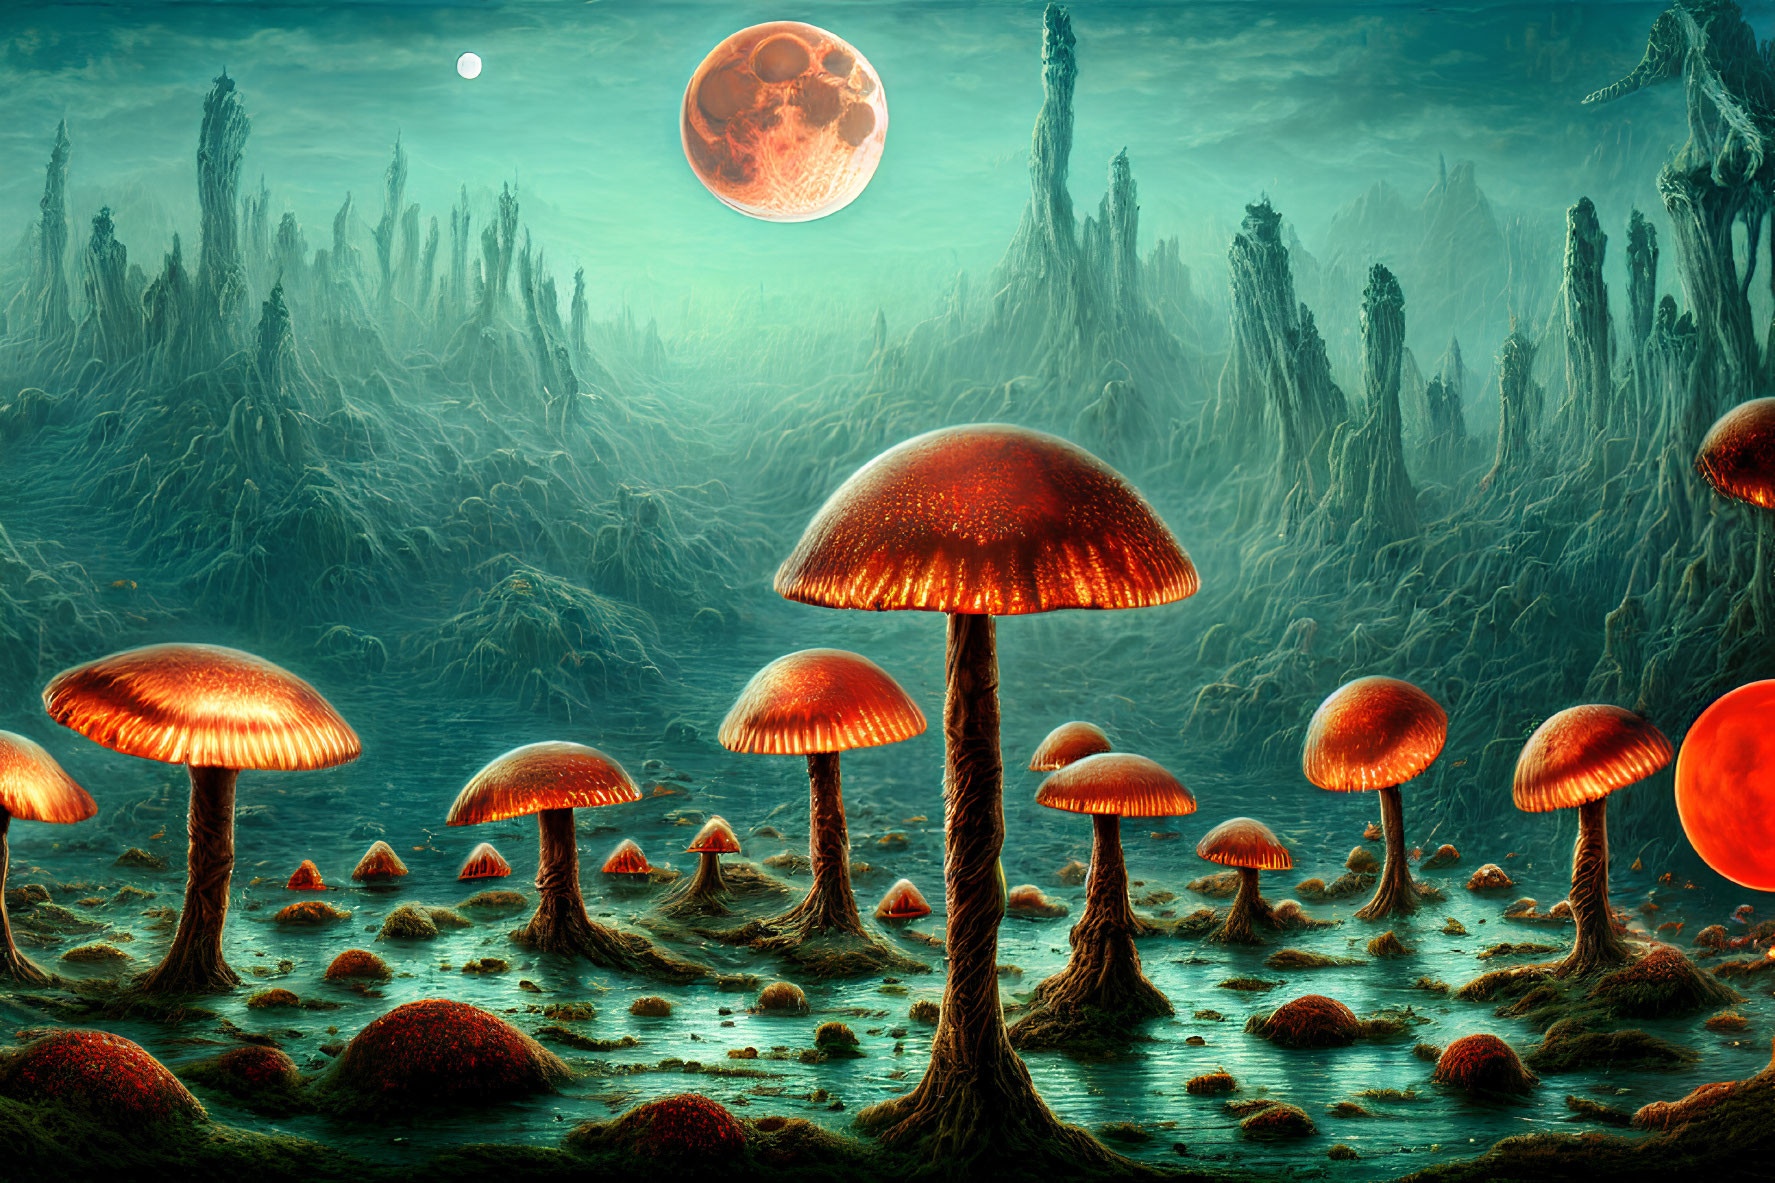 Surreal landscape featuring glowing mushrooms, towering structures, and two moons in an alien greenish-blue